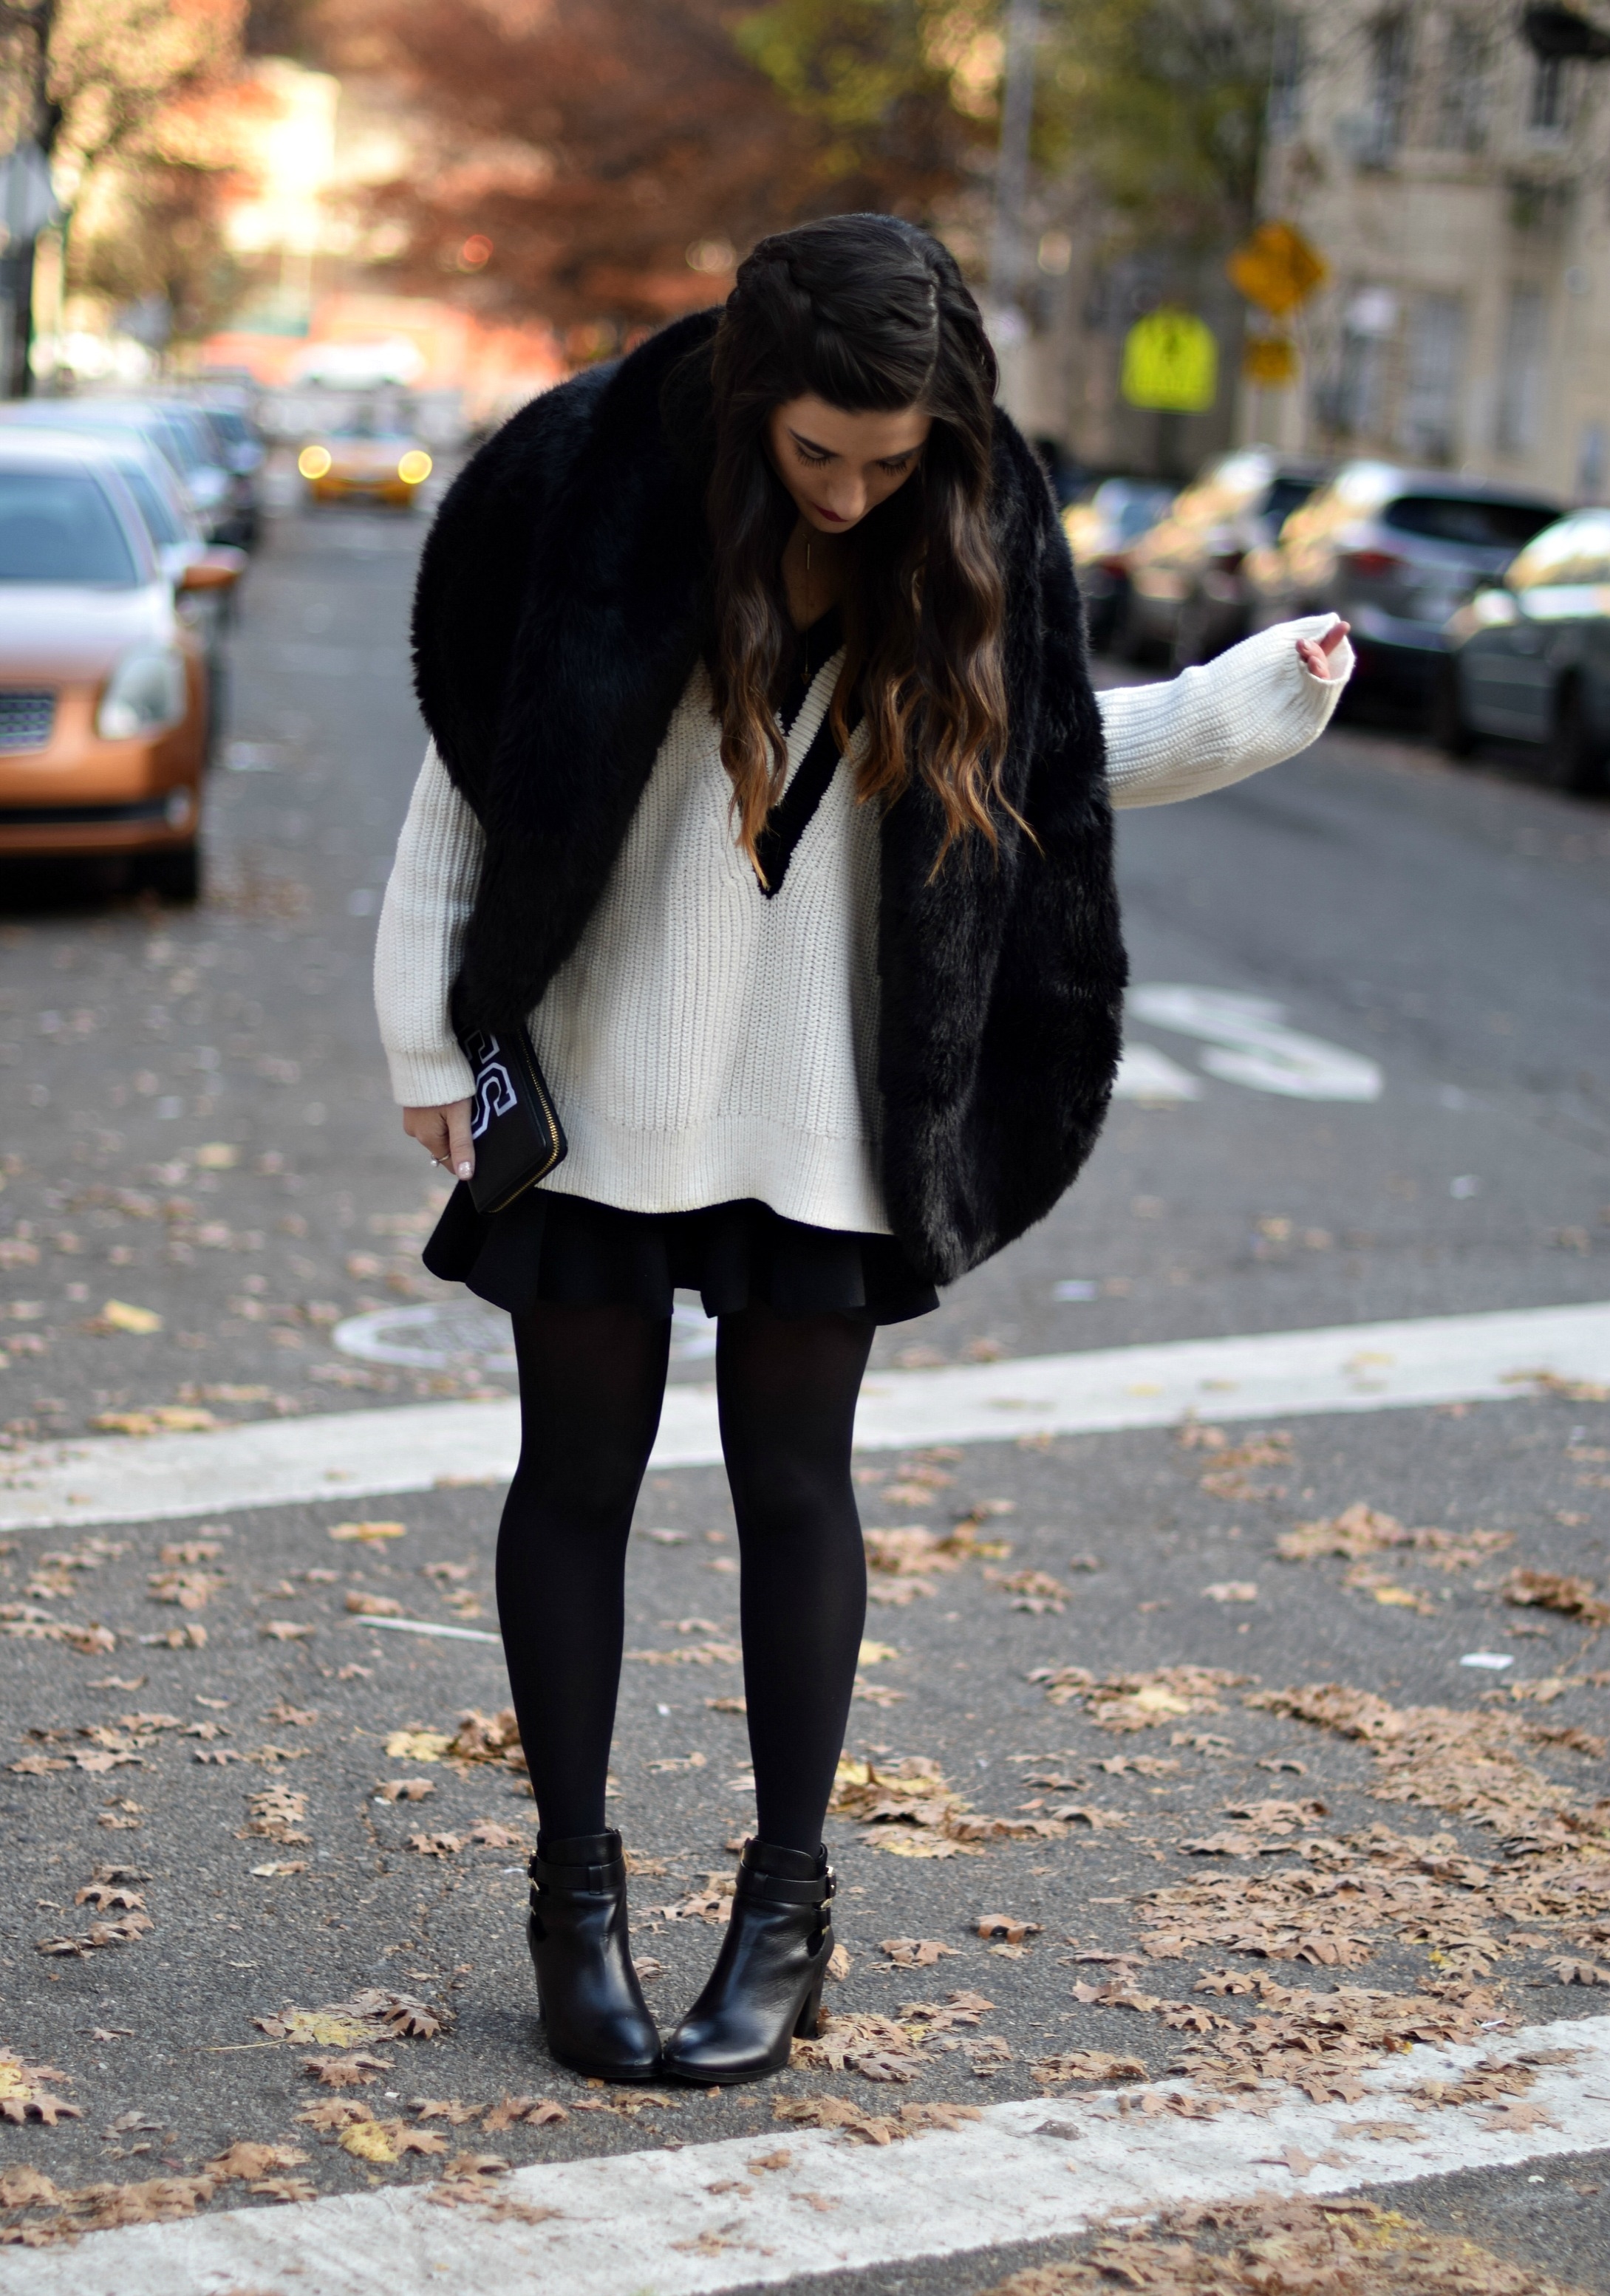 Chunky Varsity Knit Fur Stole Louboutins & Love Fashion Blog Esther Santer NYC Street Style Blogger Sweater Girl Women Photoshoot Model Shoes Black Booties Louise et Cie Nordstrom Hair Swag H&M Mini Skirt Neutrals OOTD Outfit Tights Winter Wear Shop.jpg